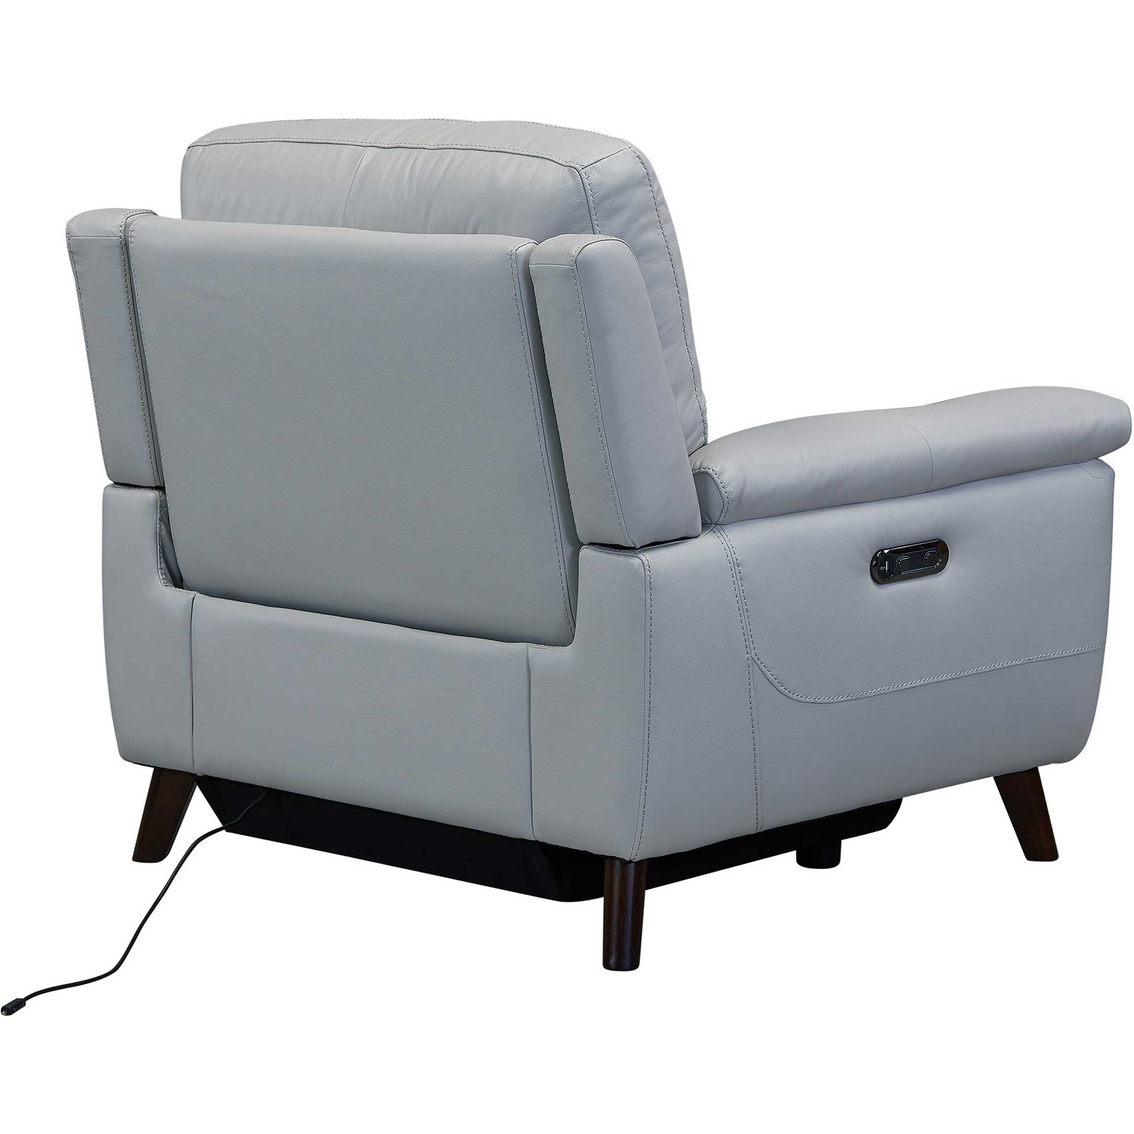 Armen Living Lizette Contemporary Top Grain Leather Power Recliner Chair with USB - Image 4 of 10